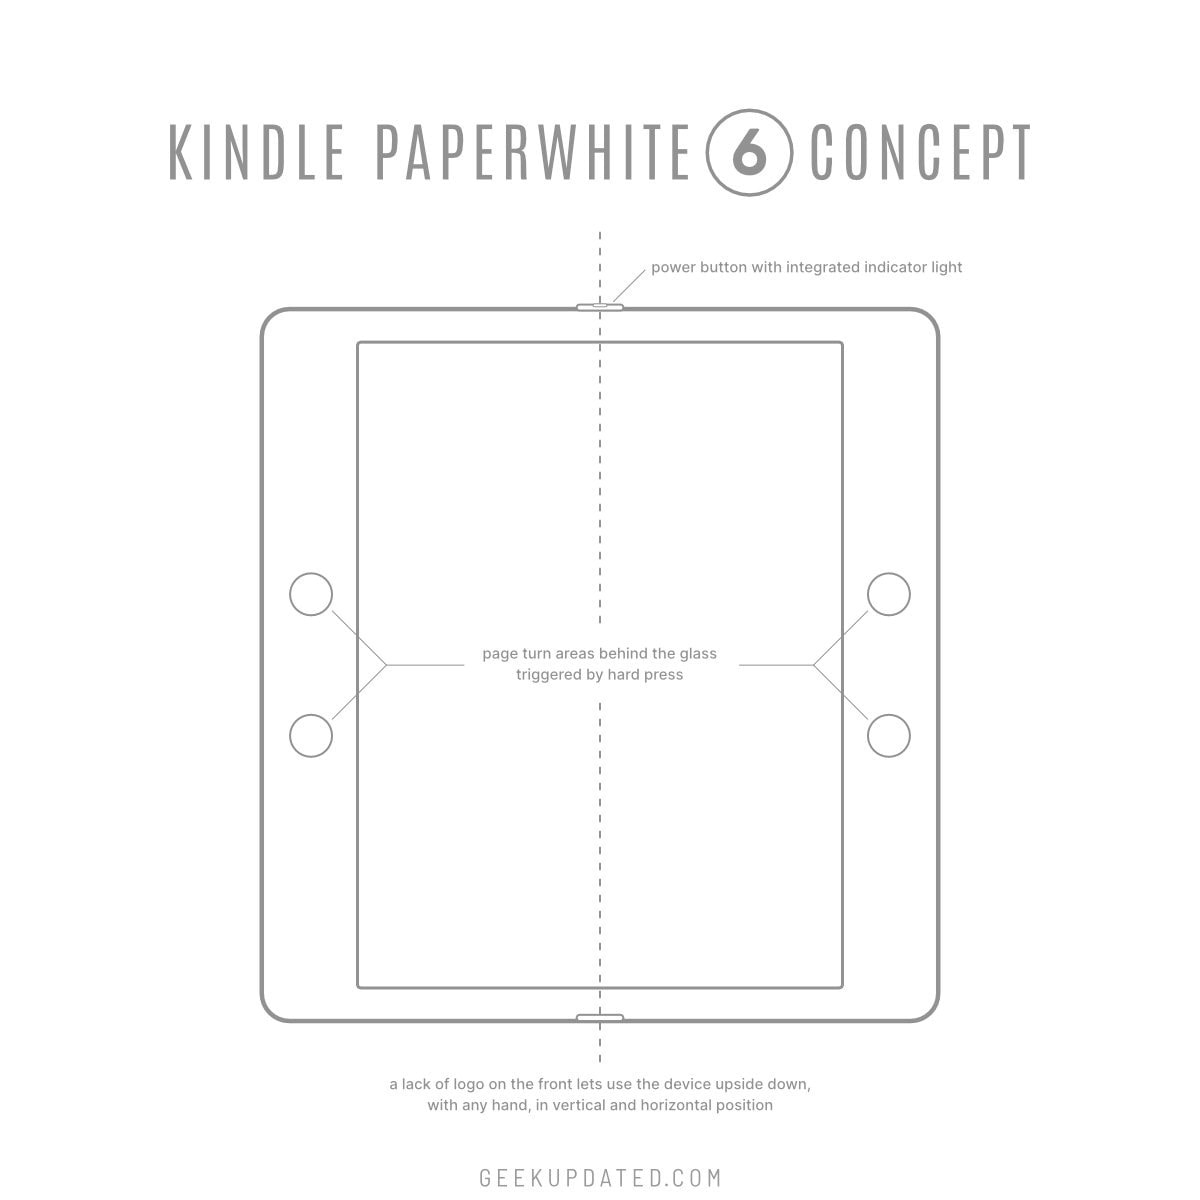 Next-generation Kindle Paperwhite concept - hard-press page turn areas